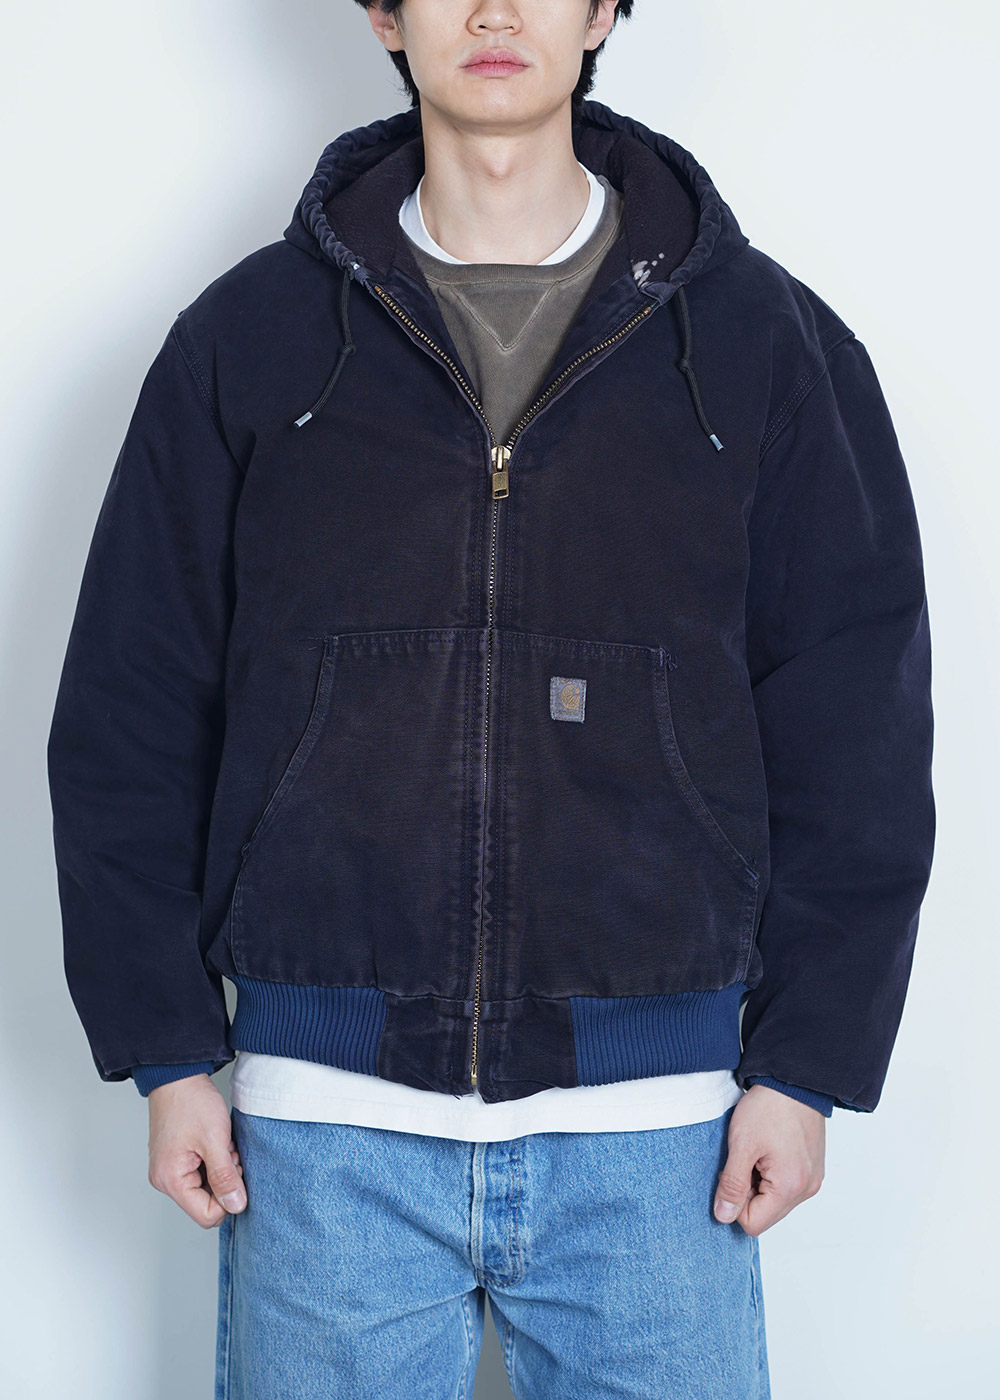 reproduction 048 / carhartt (Overdyed)